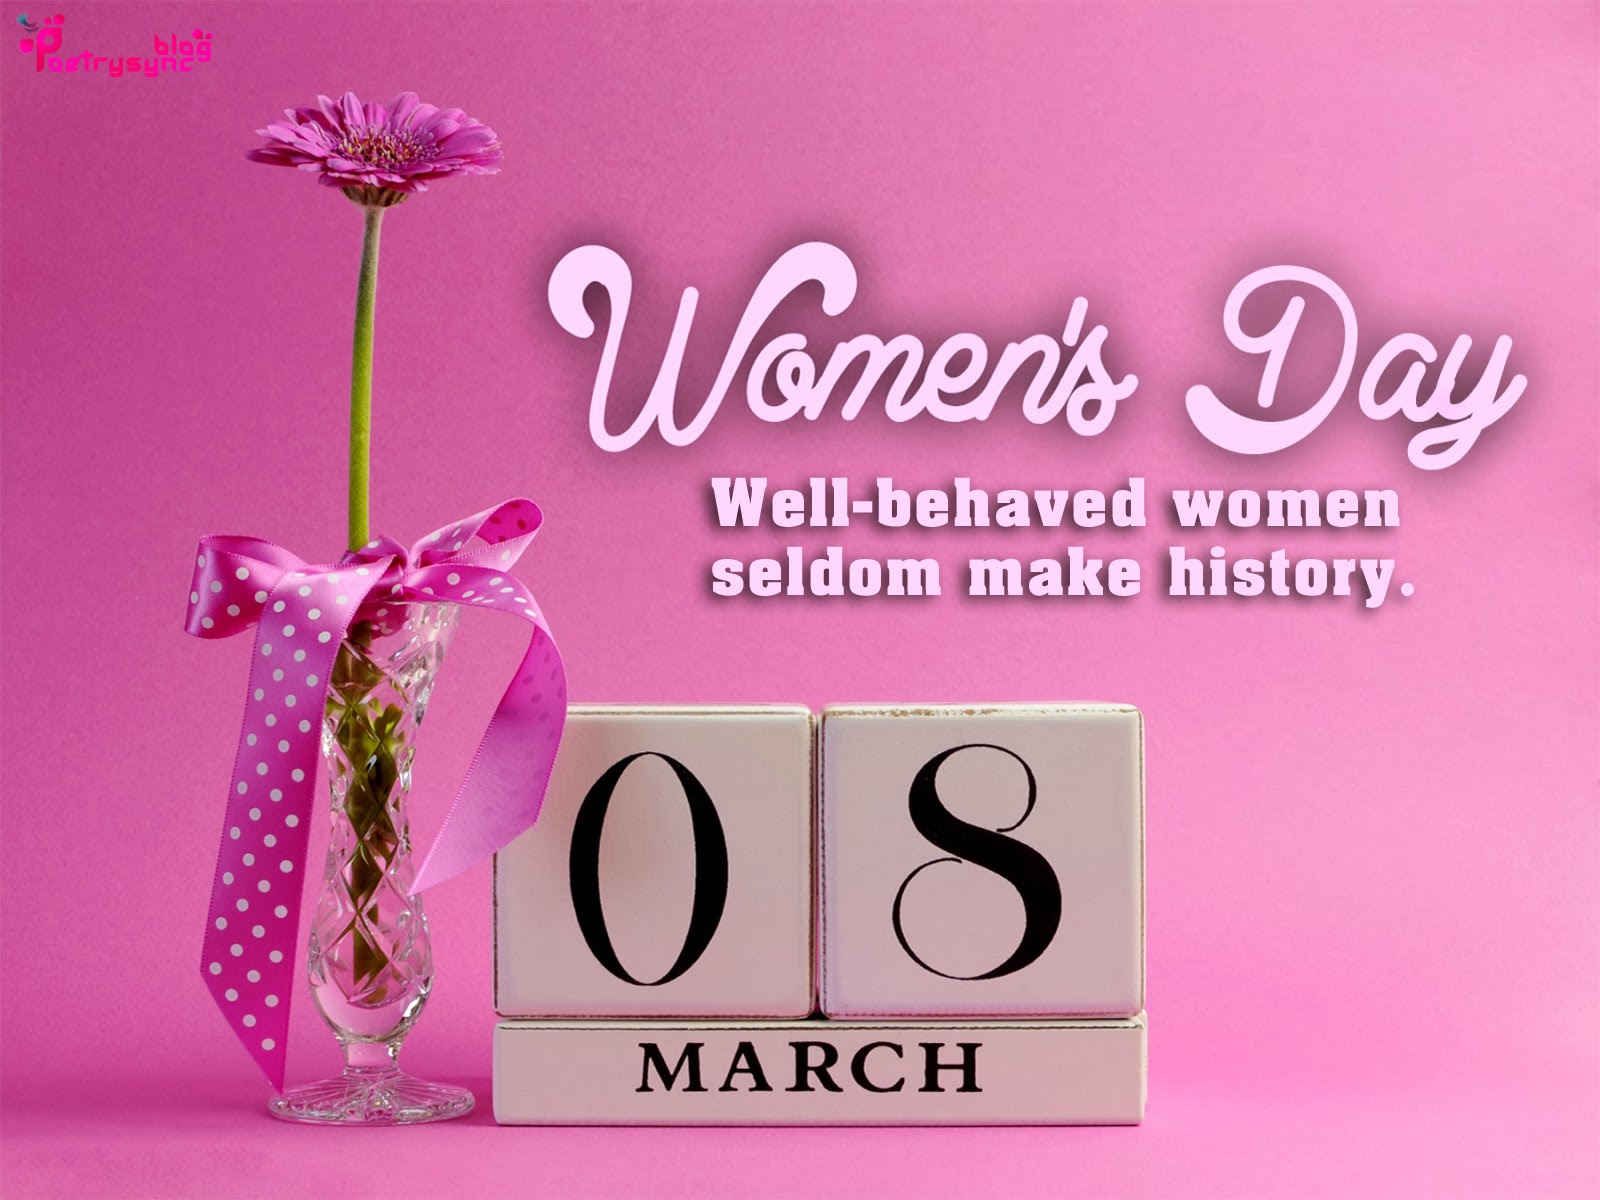 Why use quotes for International Women's Day